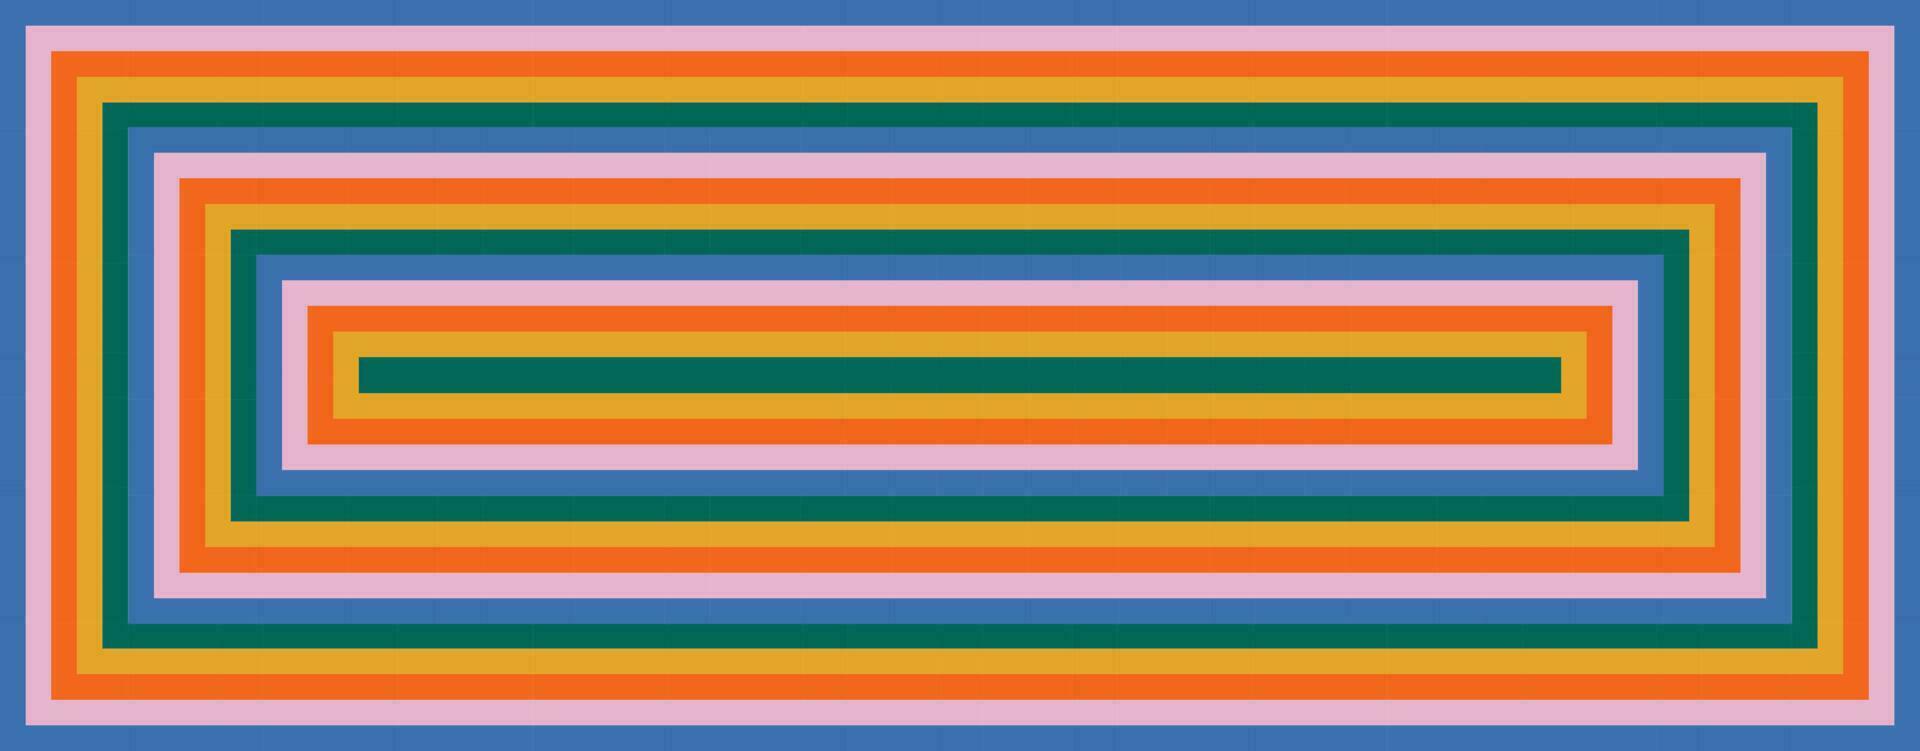 Groovy abstract background with rainbow colored striped rectangles. Retro color spectrum. 60-70s style  pattern with colorful lines Trendy cartoon vector backdrop. Vintage hippie stripe print